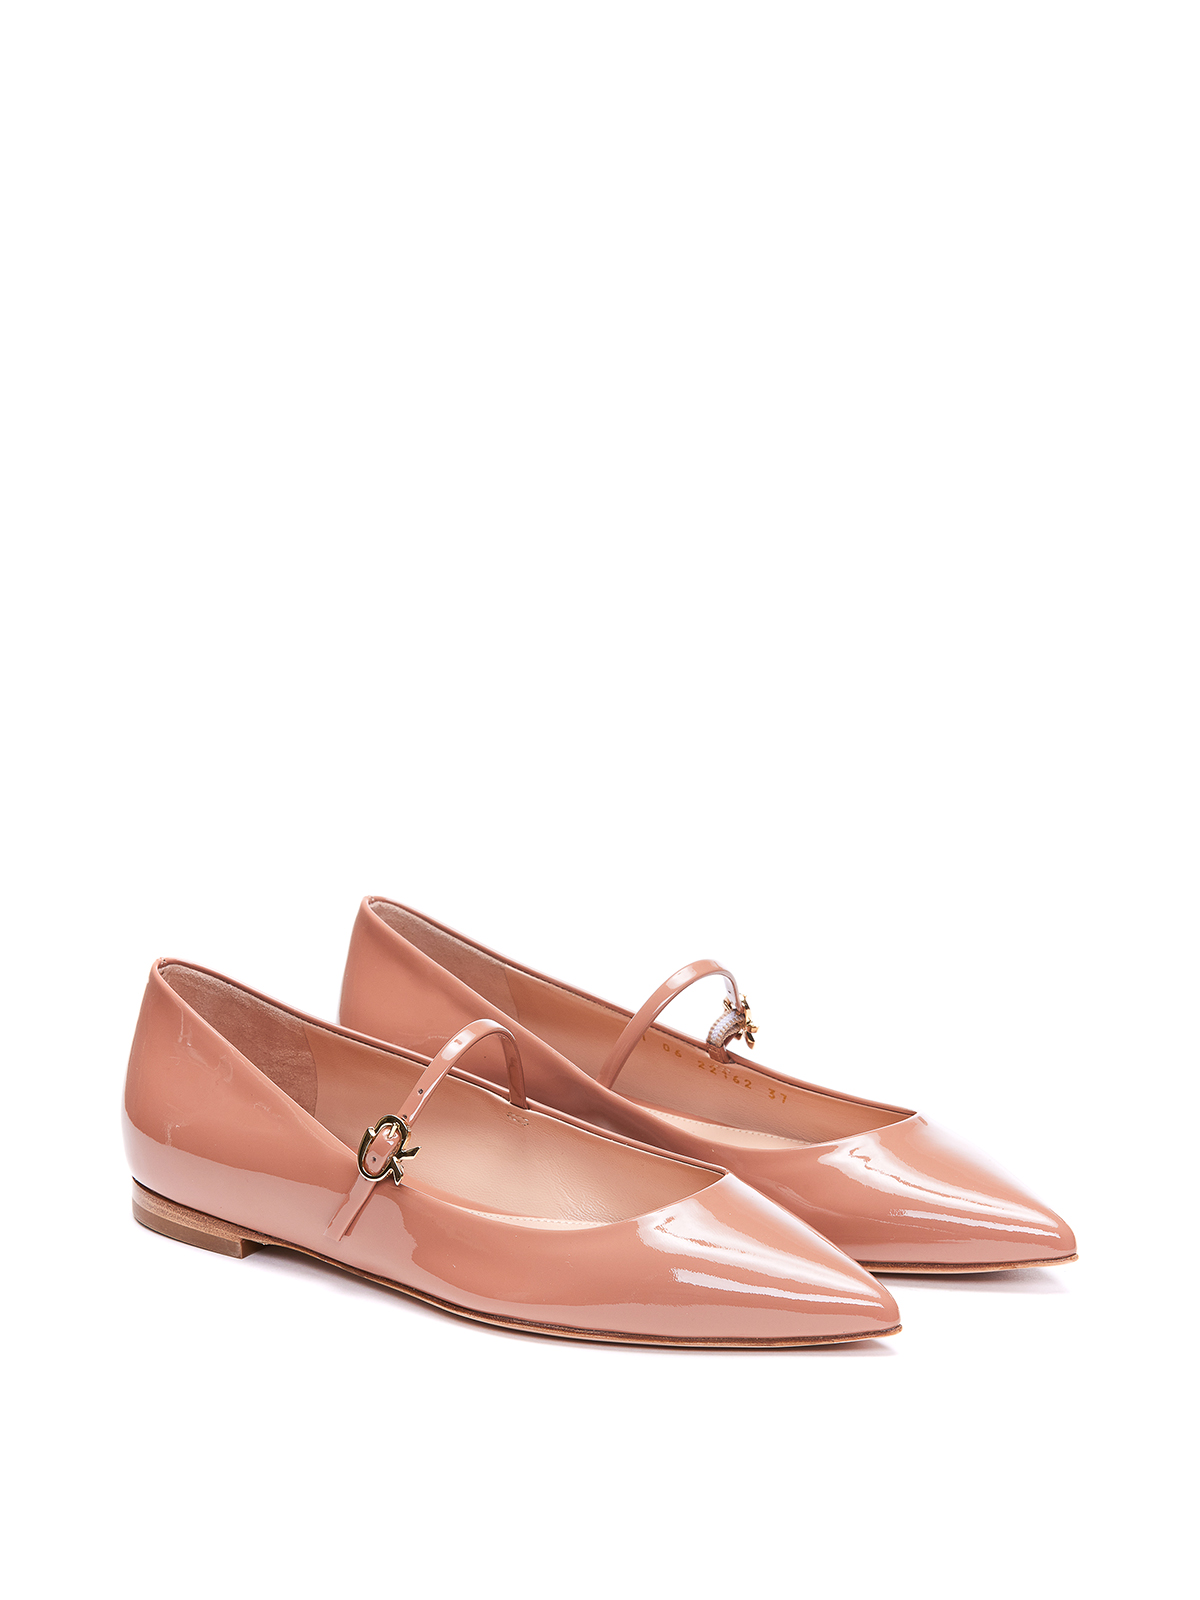 Shop Gianvito Rossi Ribbon Jane Sandals In Color Carne Y Neutral